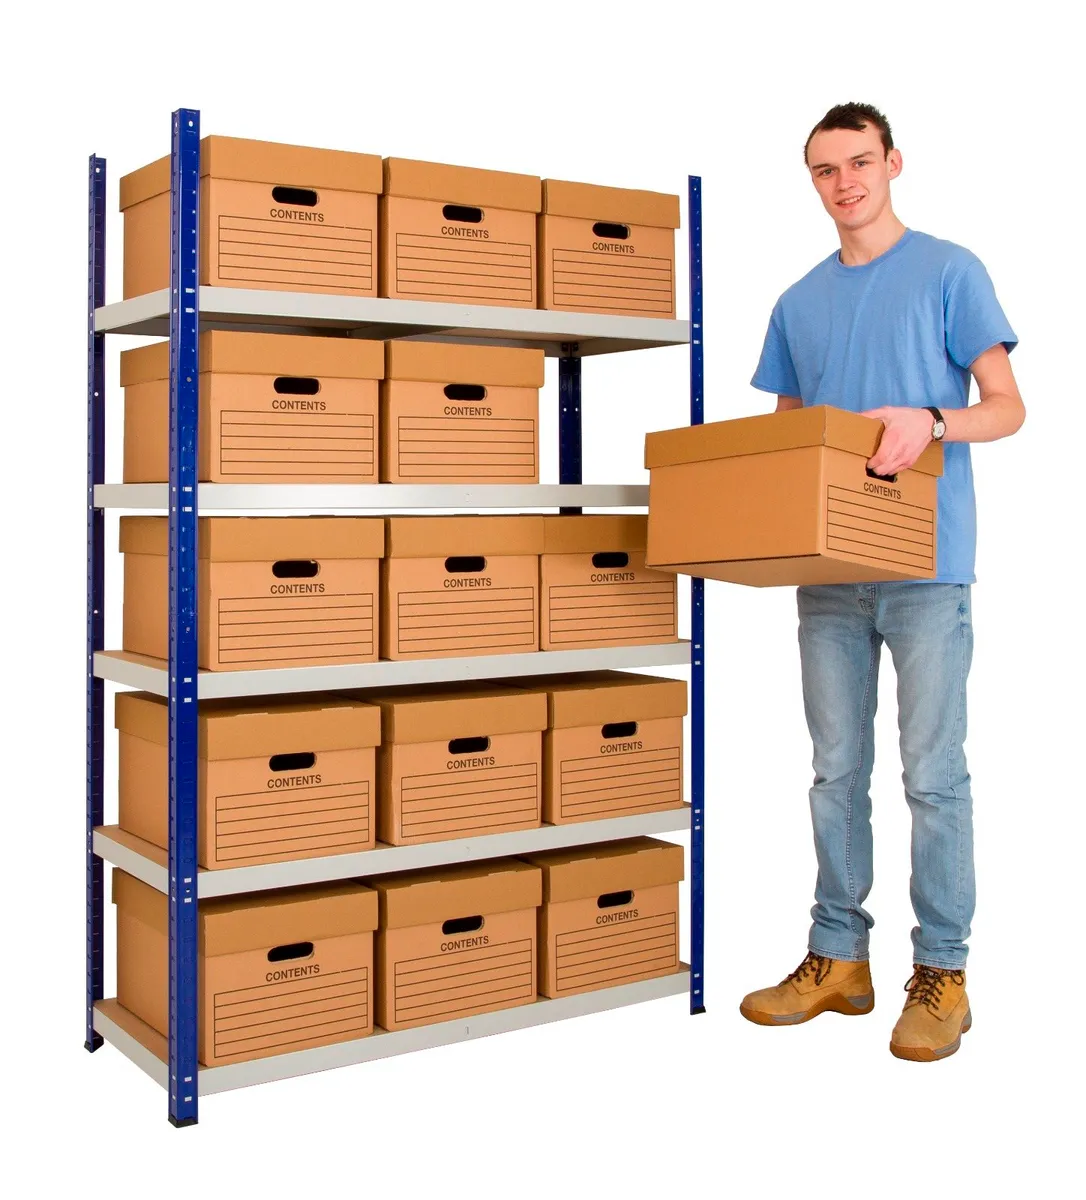 Container Shelving from €40 + vat - Image 1